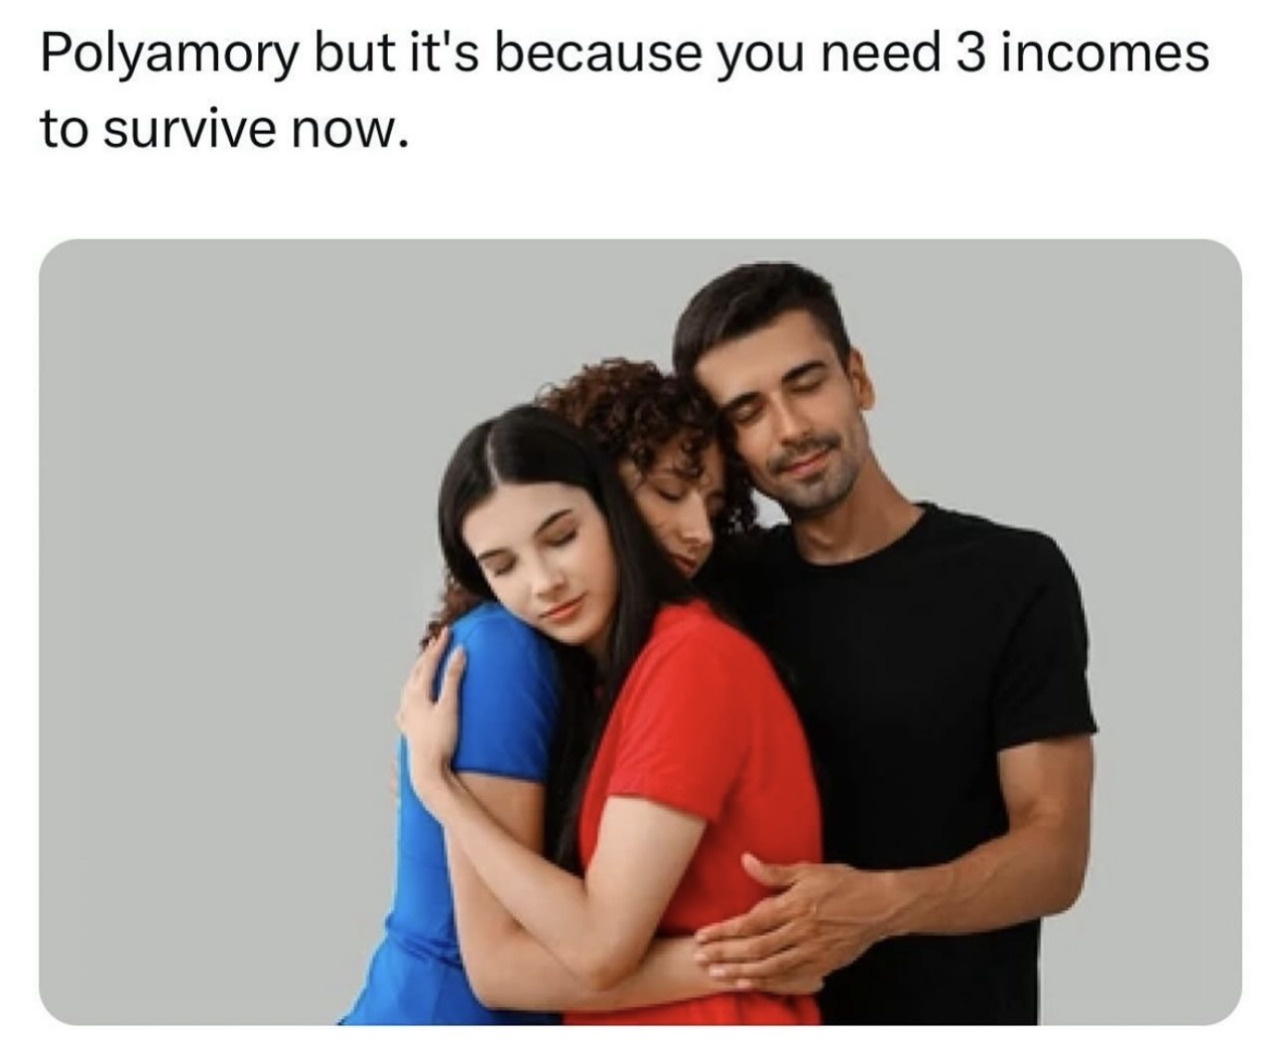 funny memes - polyamory but it's because you need 3 incomes to survive now - Polyamory but it's because you need 3 incomes to survive now.